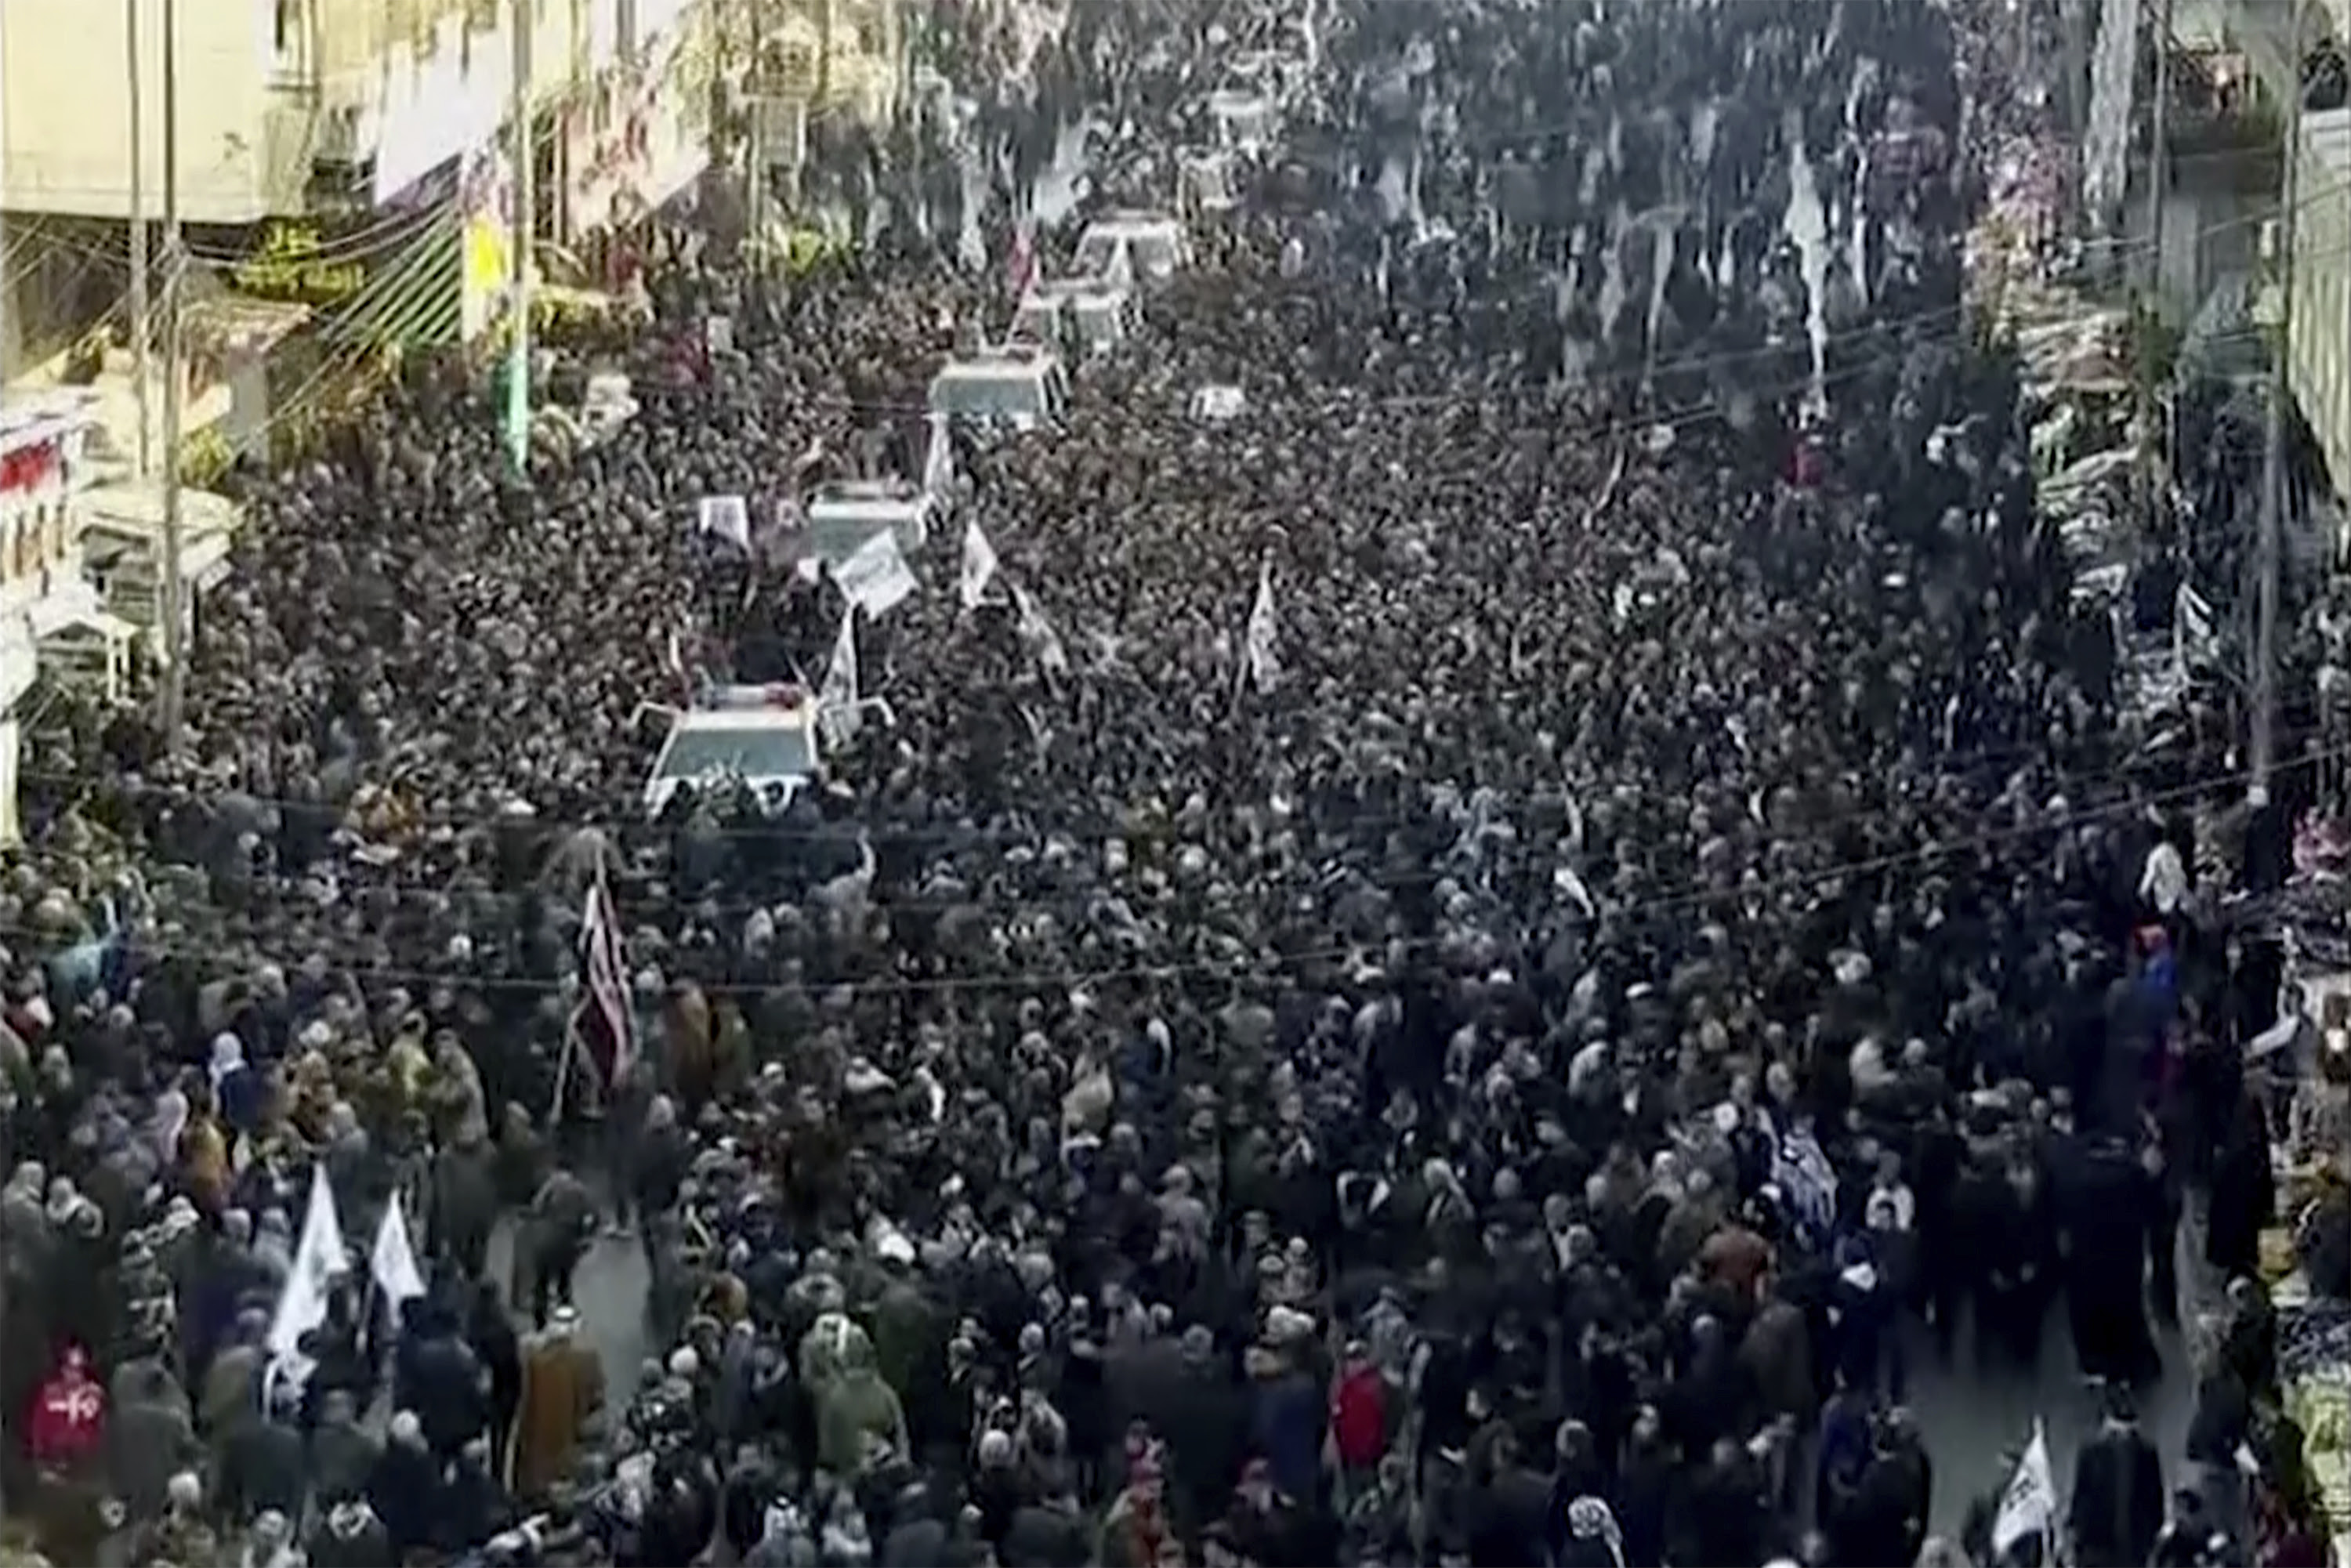  The procession began at the Imam Kadhim shrine in Baghdad, one of the most revered sites in Shiite Islam